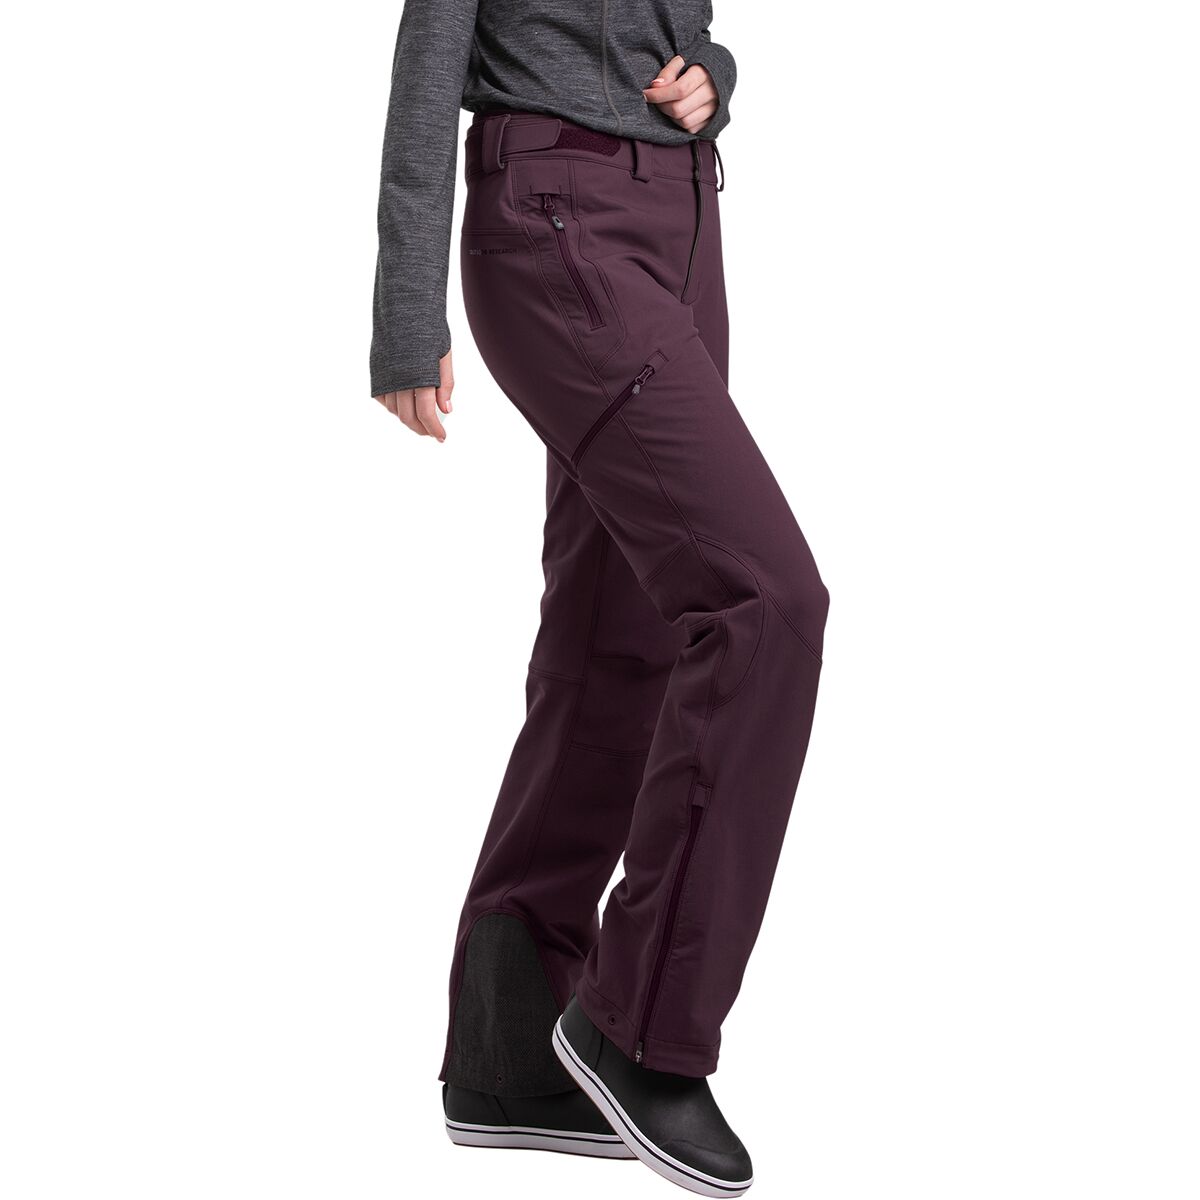 Outdoor Research Cirque II Softshell Pant - Women's